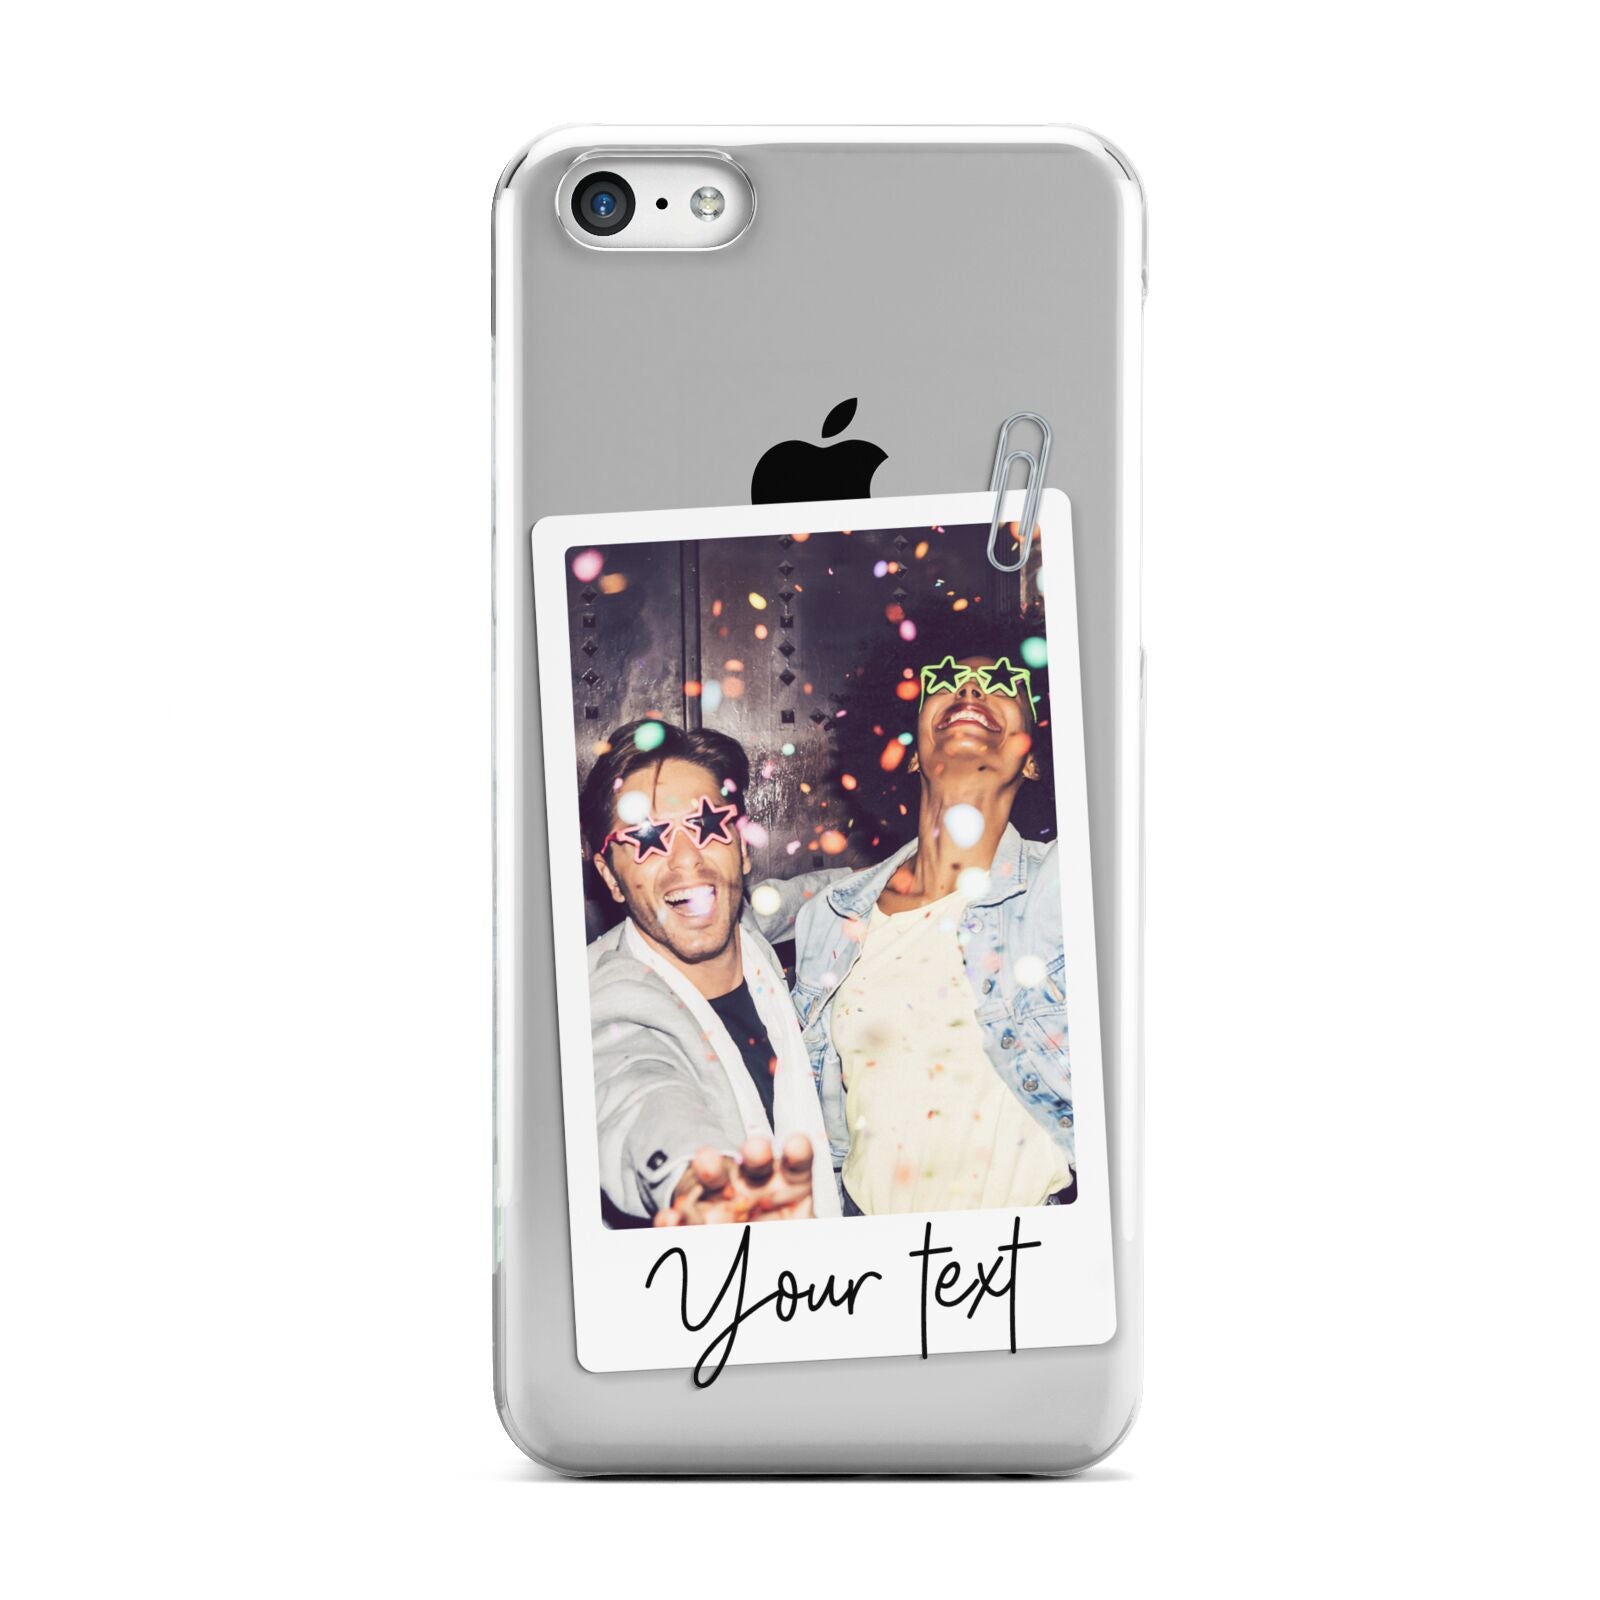 Personalised Photo with Text Apple iPhone 5c Case